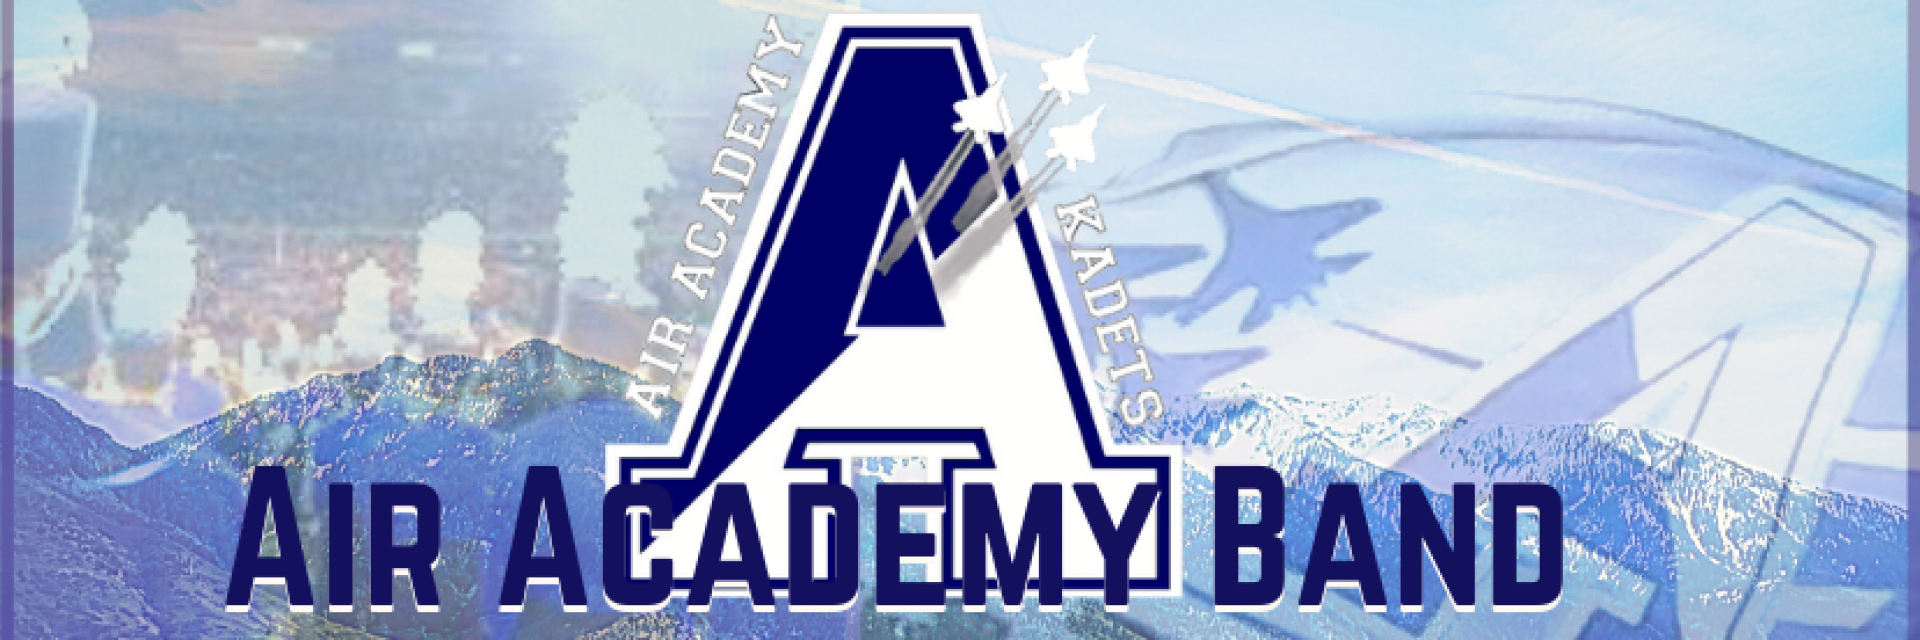 Air Academy HS Daily Schedule PDFs: 2020